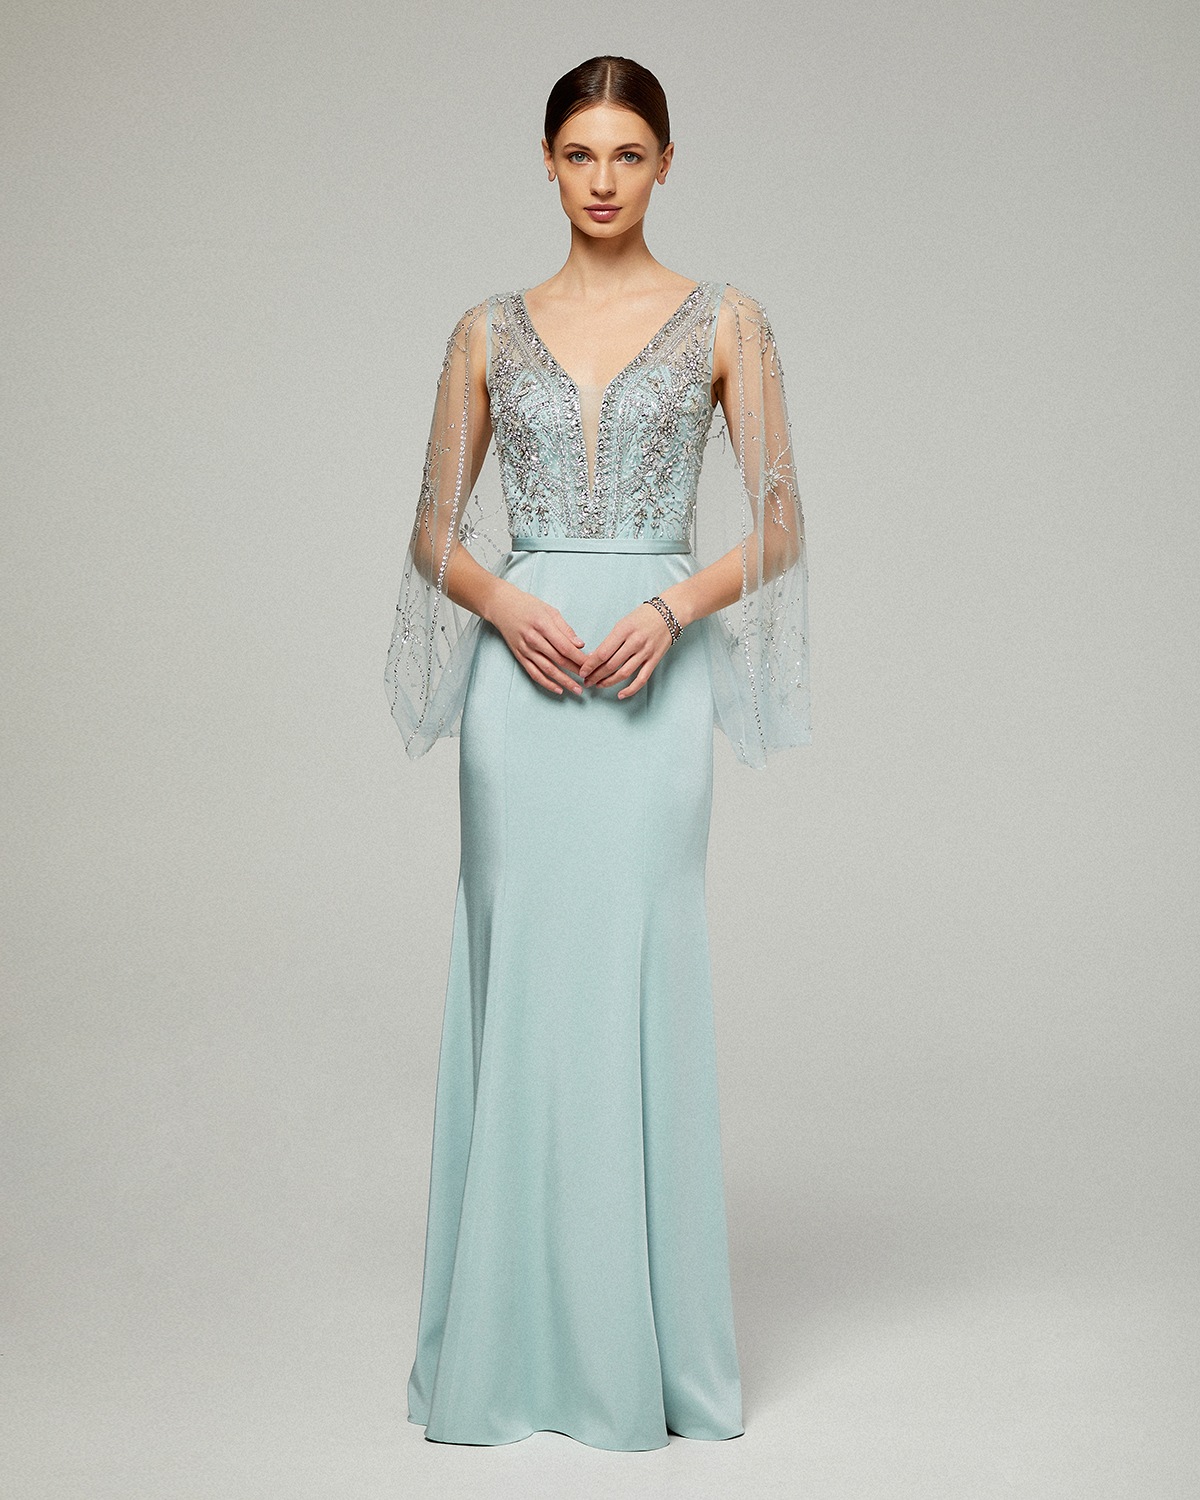 Classic Dresses / Long evening fully beaded dress with beaded cape